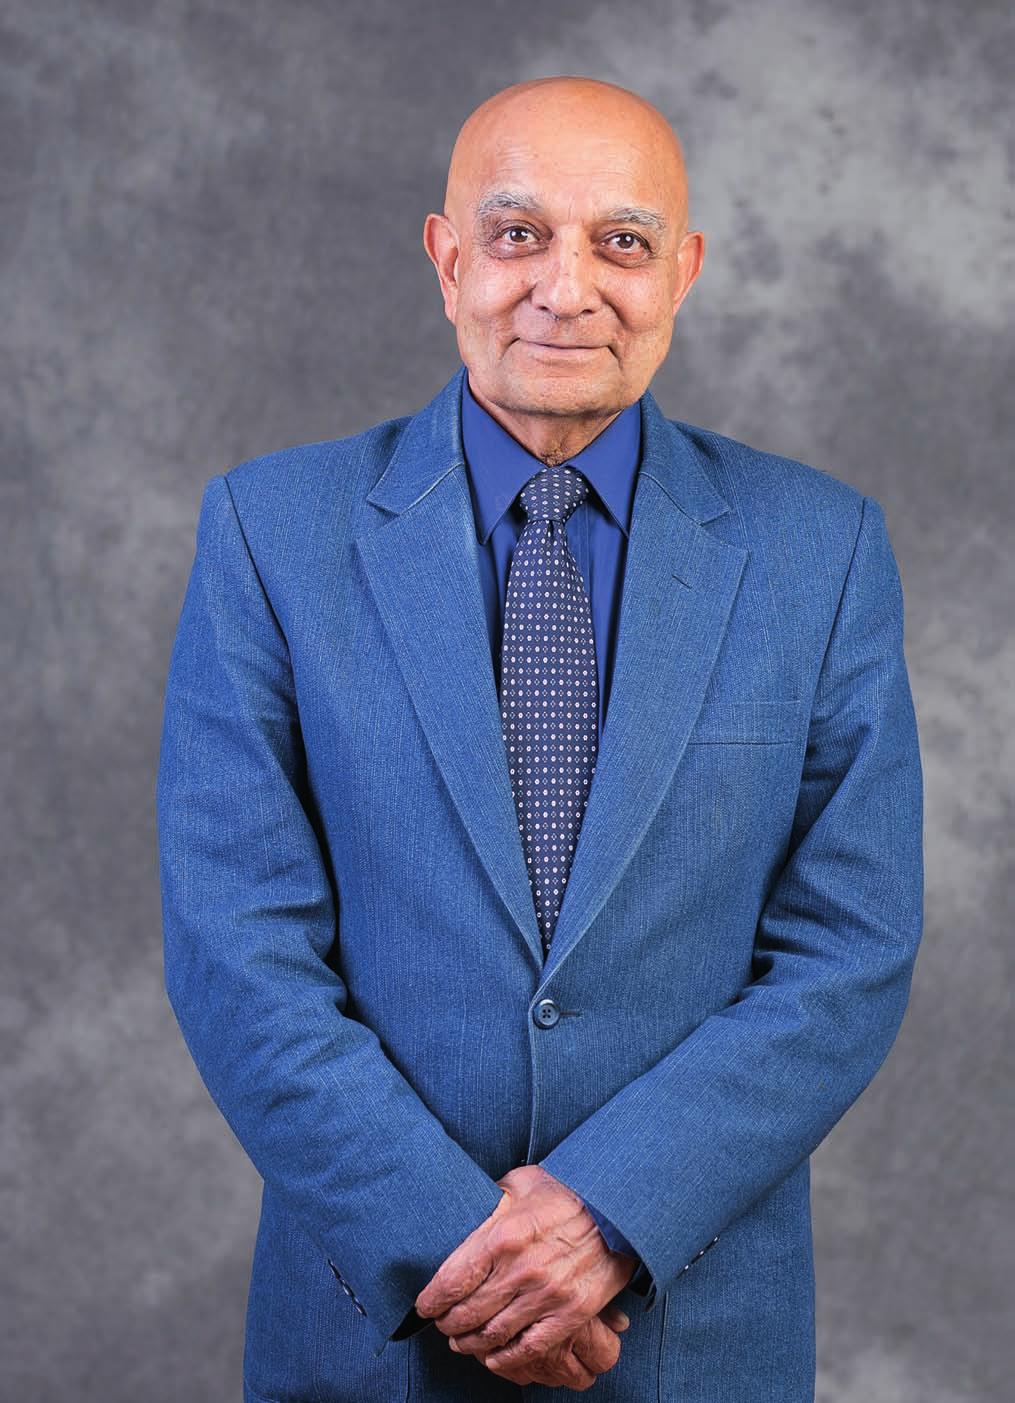 CHAIRPERSON S REPORT Professor Emeritus Yosuf VERIAVA The Council for Medical Schemes Annual Report traditionally focuses on issues pertaining to the private healthcare sector which it regulates.